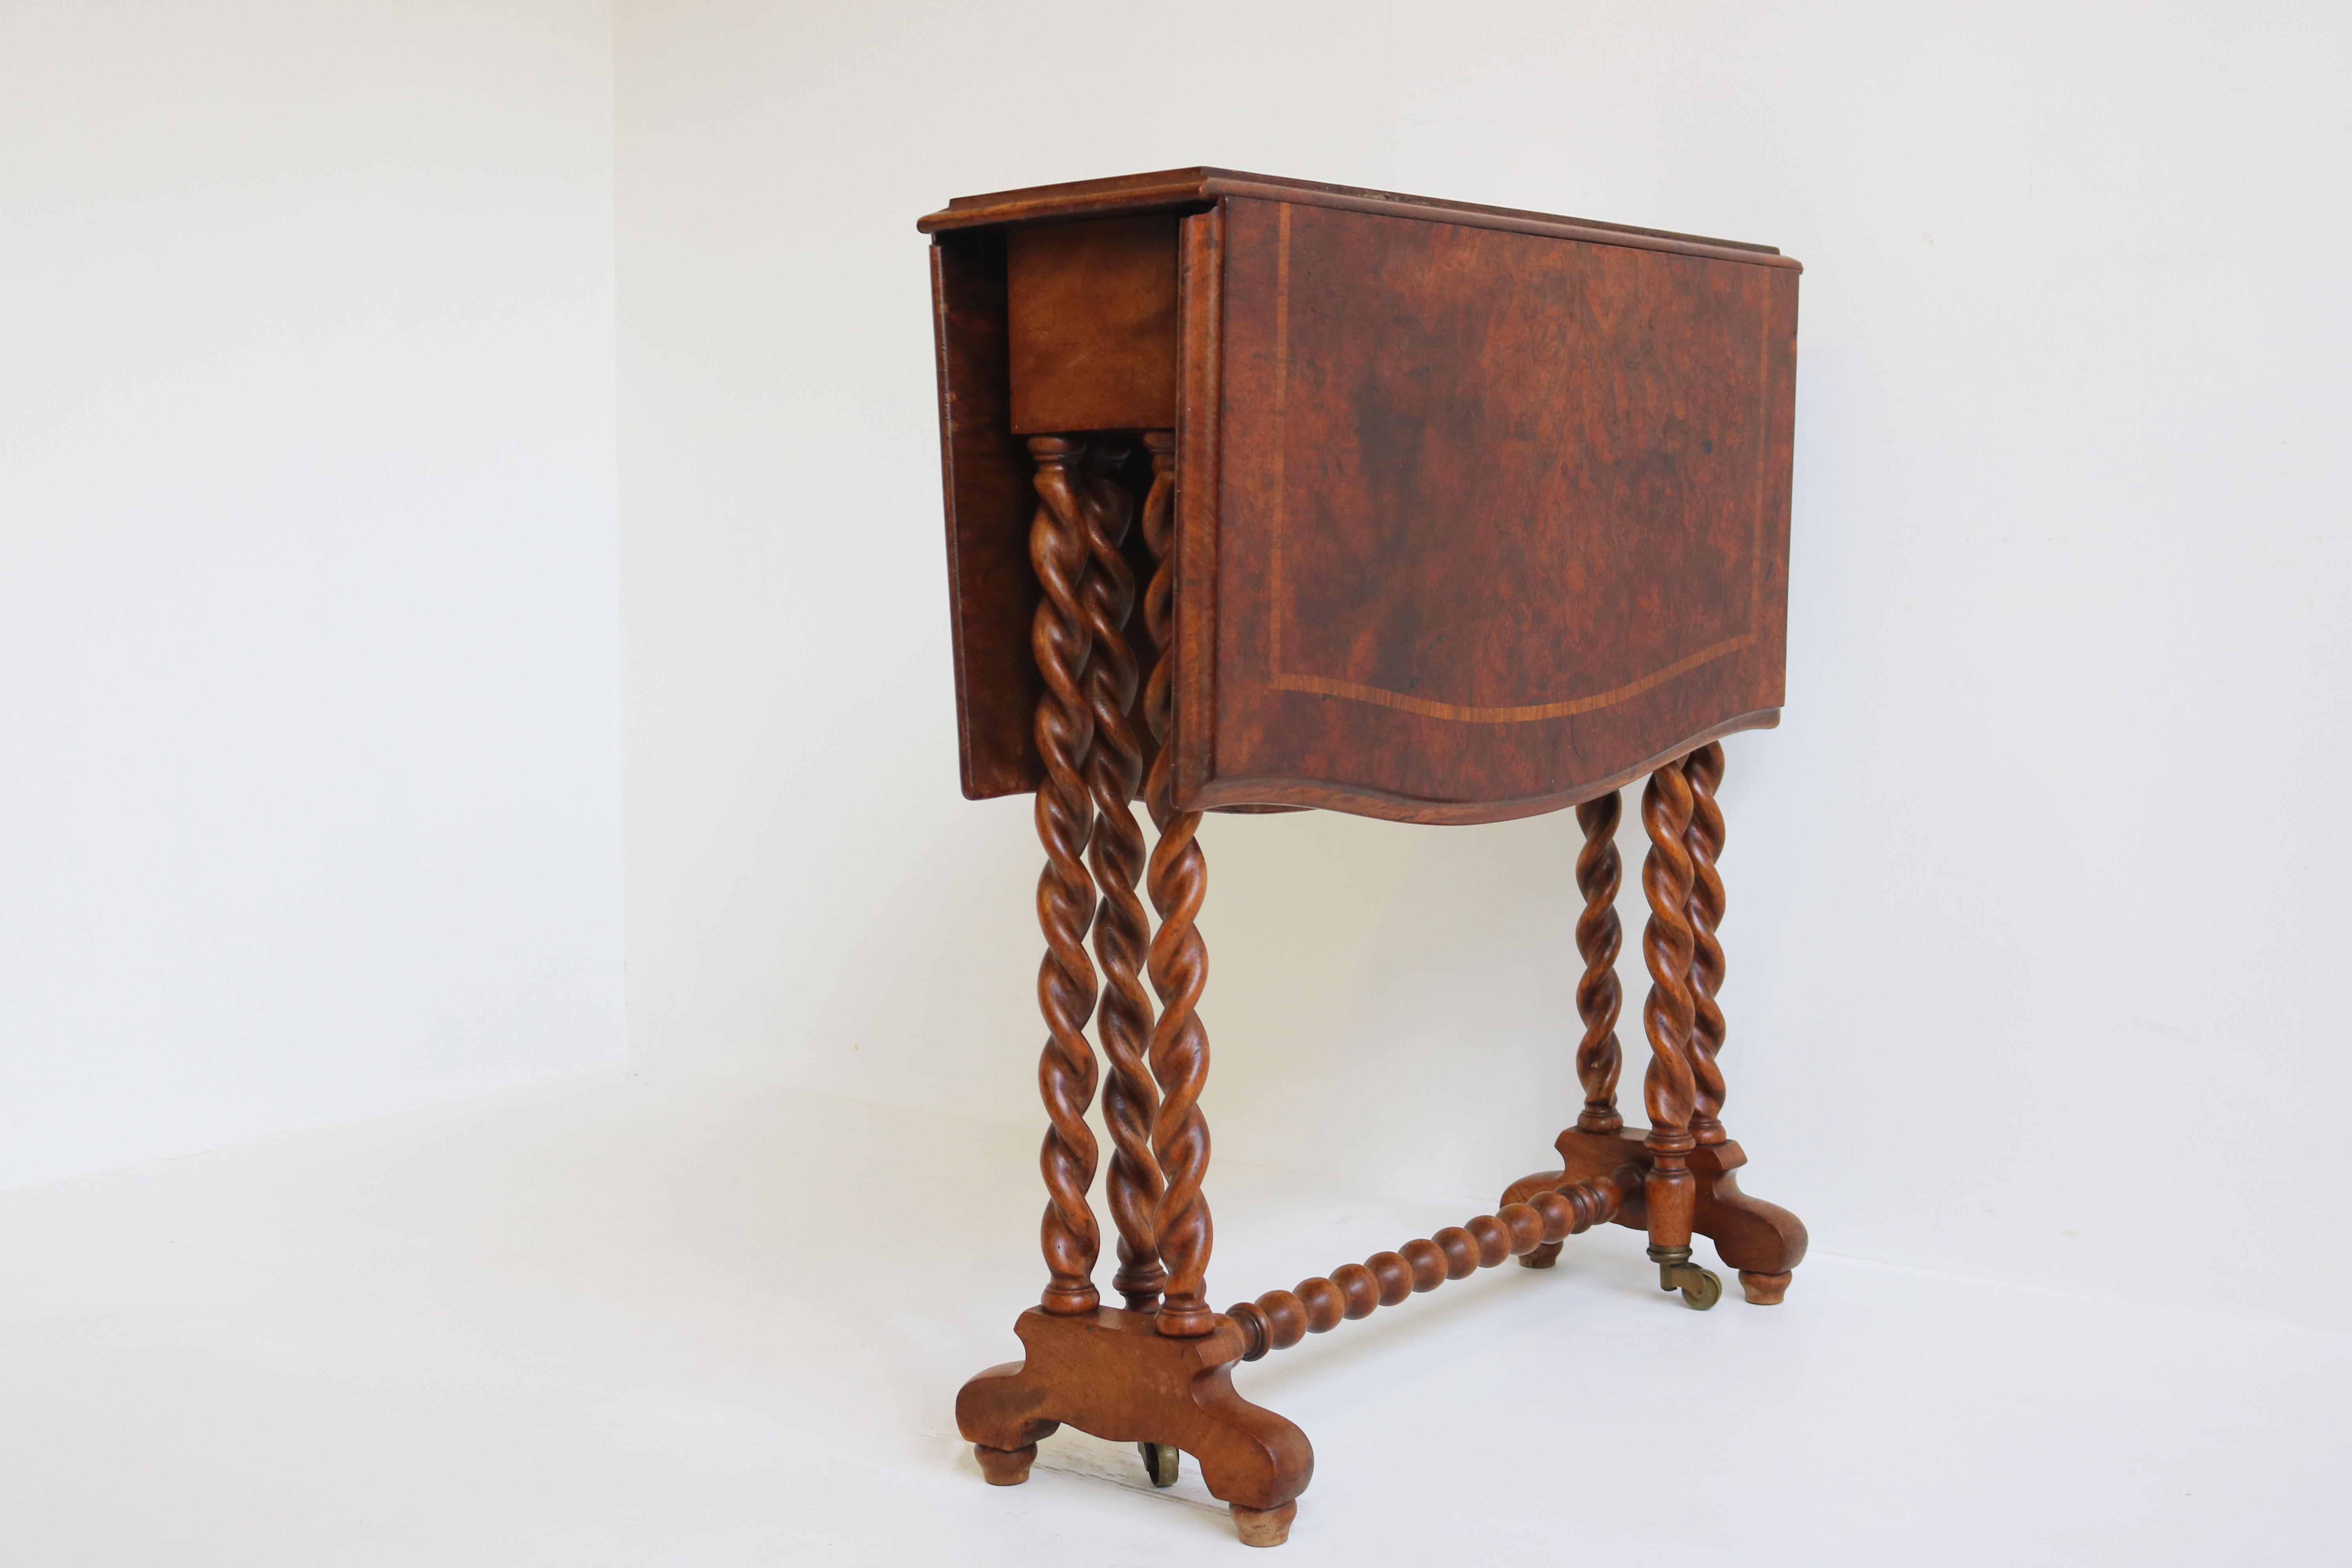 Hand-Carved Antique English Barley Twist Foldable Table / Gate-Leg Table 19th Century Burl For Sale